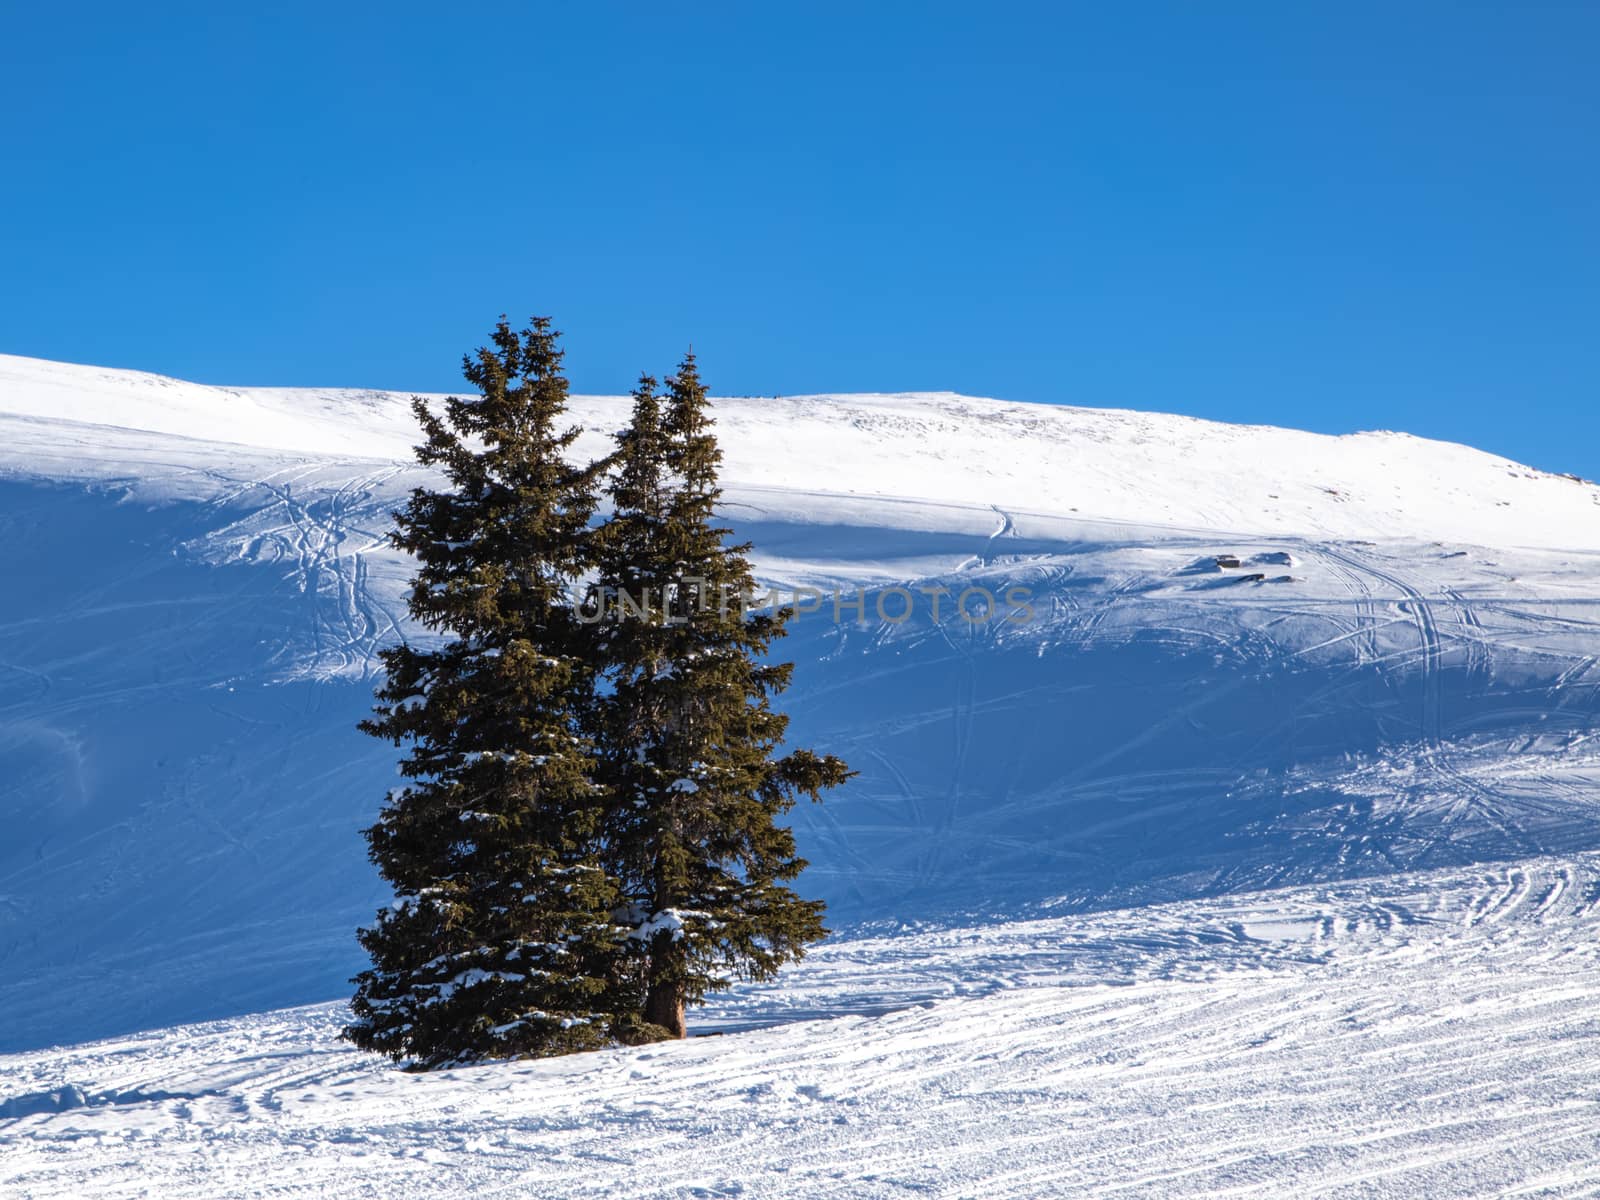 Two full grown pine trees sit alone on the hill of the Rocky Mountains in Colorado.